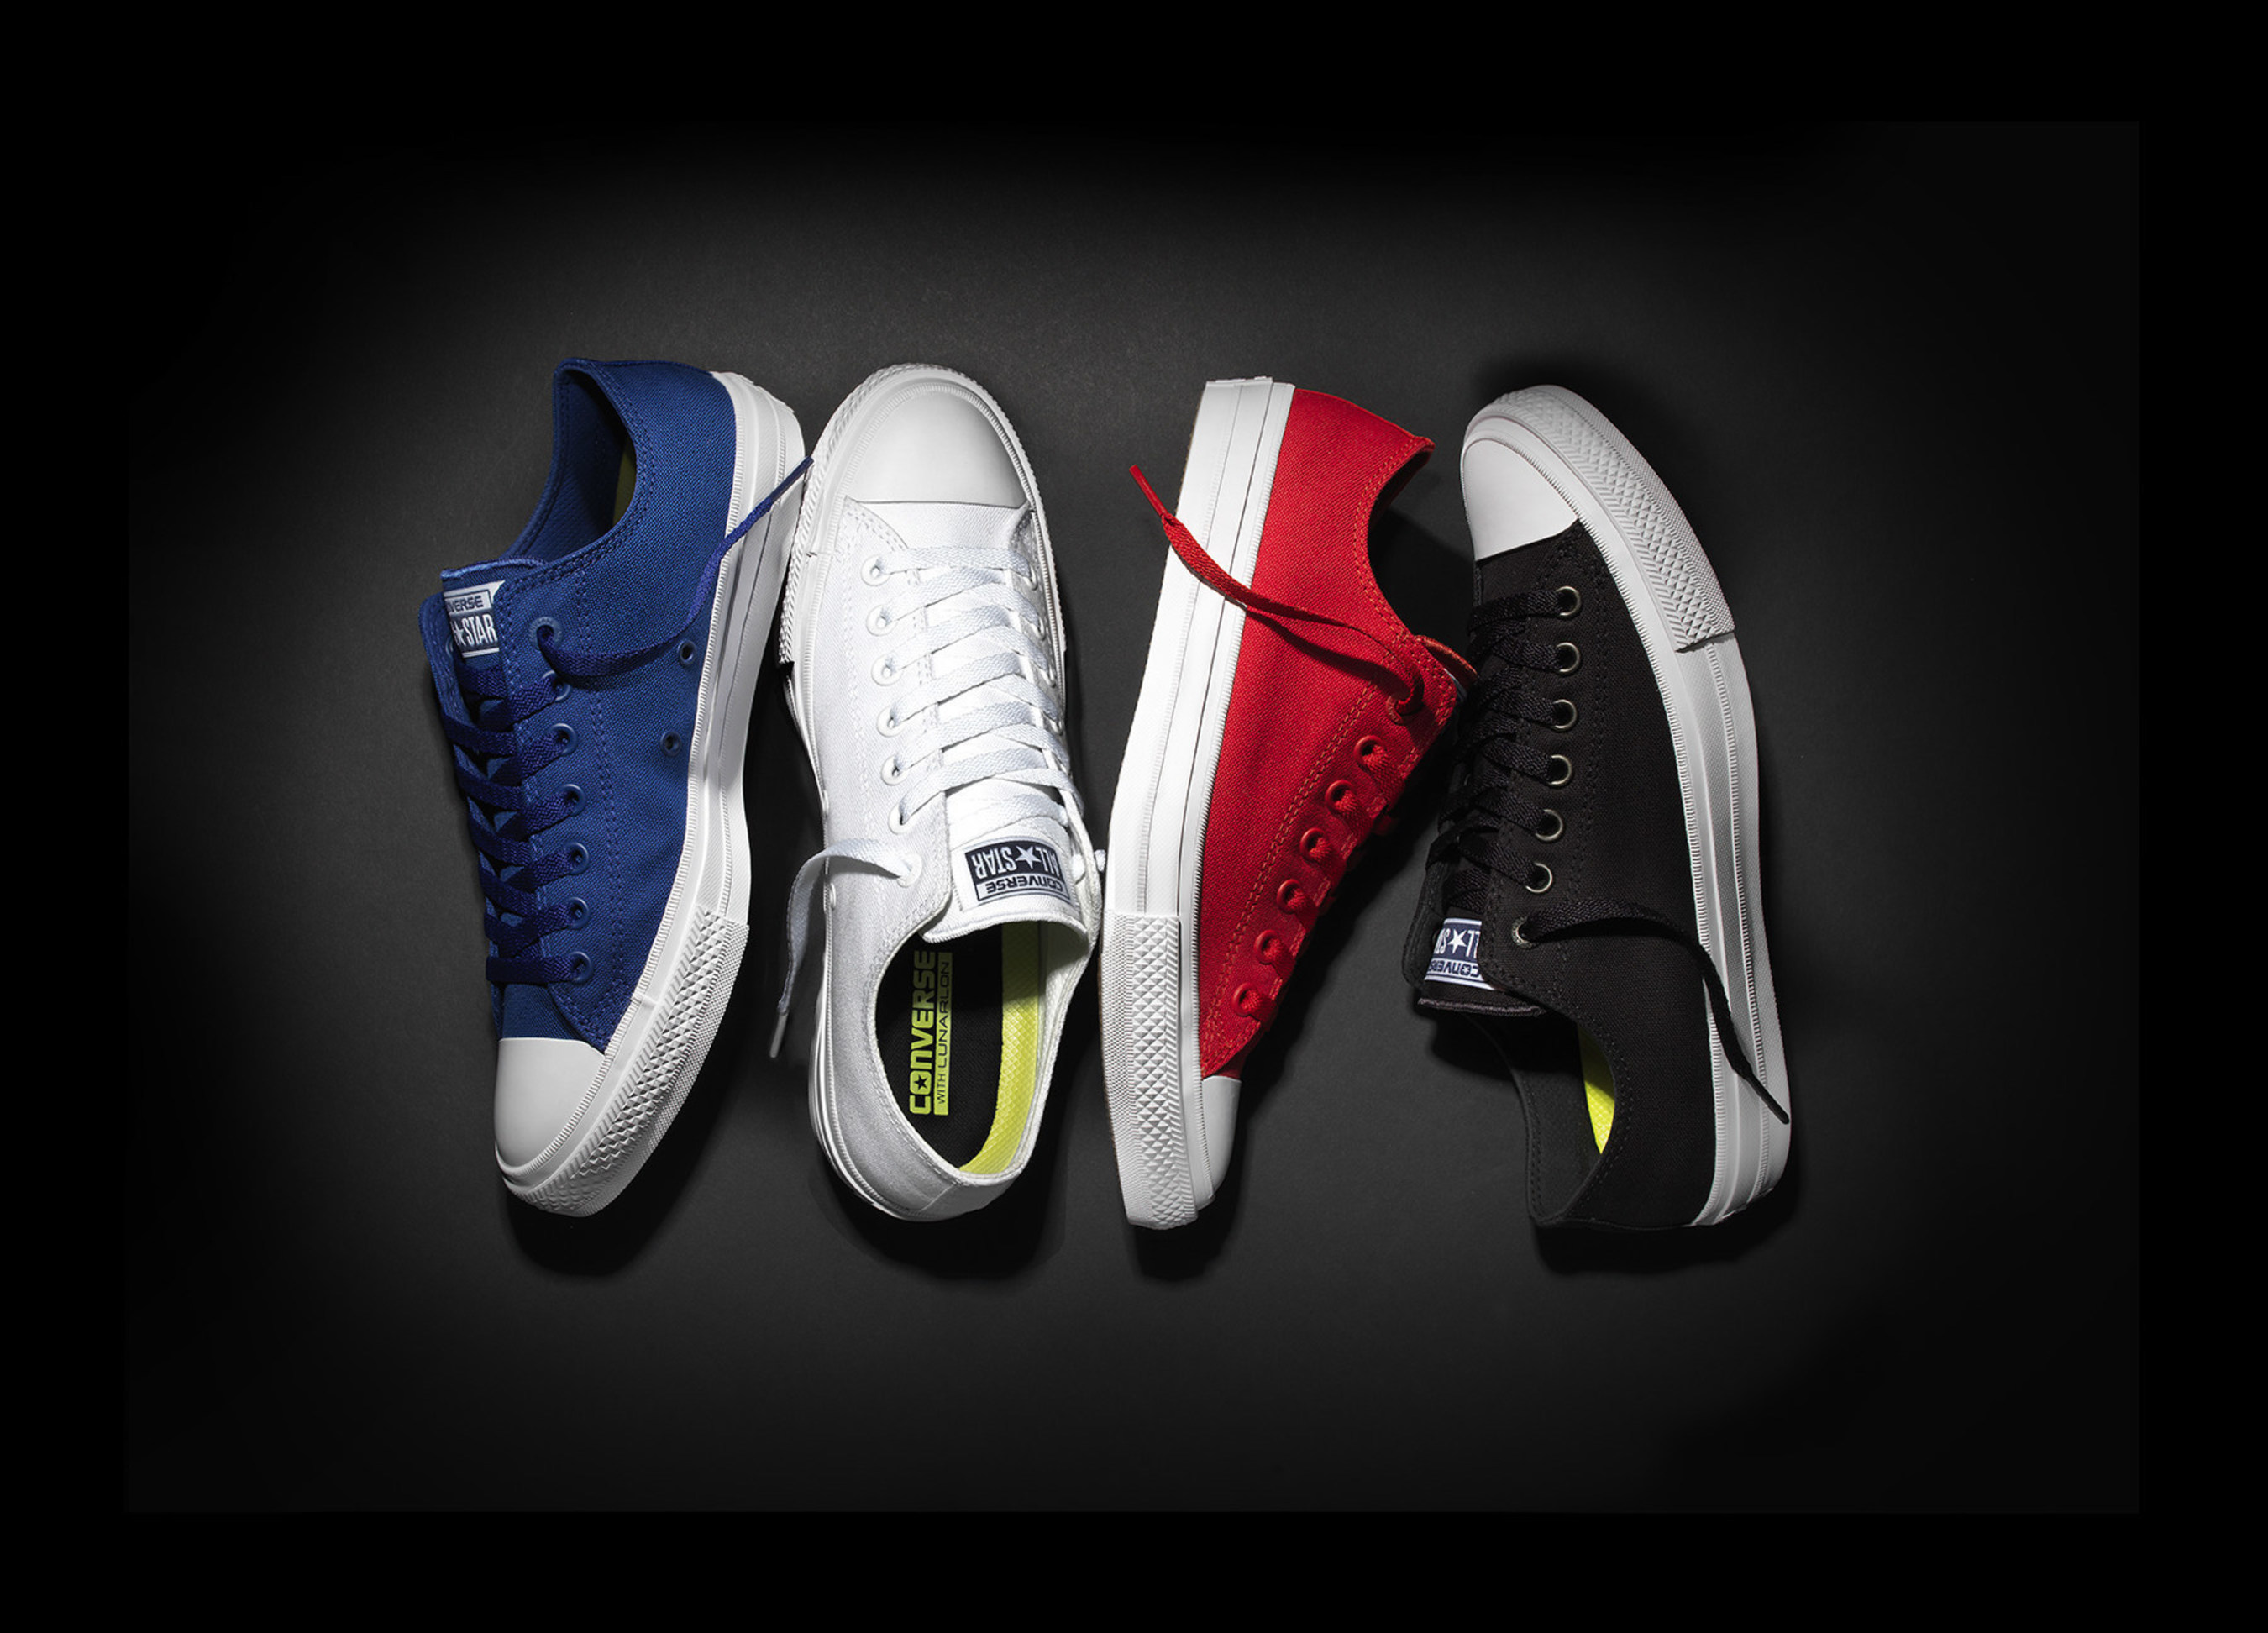 Converse Ushers In New Era With Ground-Breaking Chuck Taylor All Star II